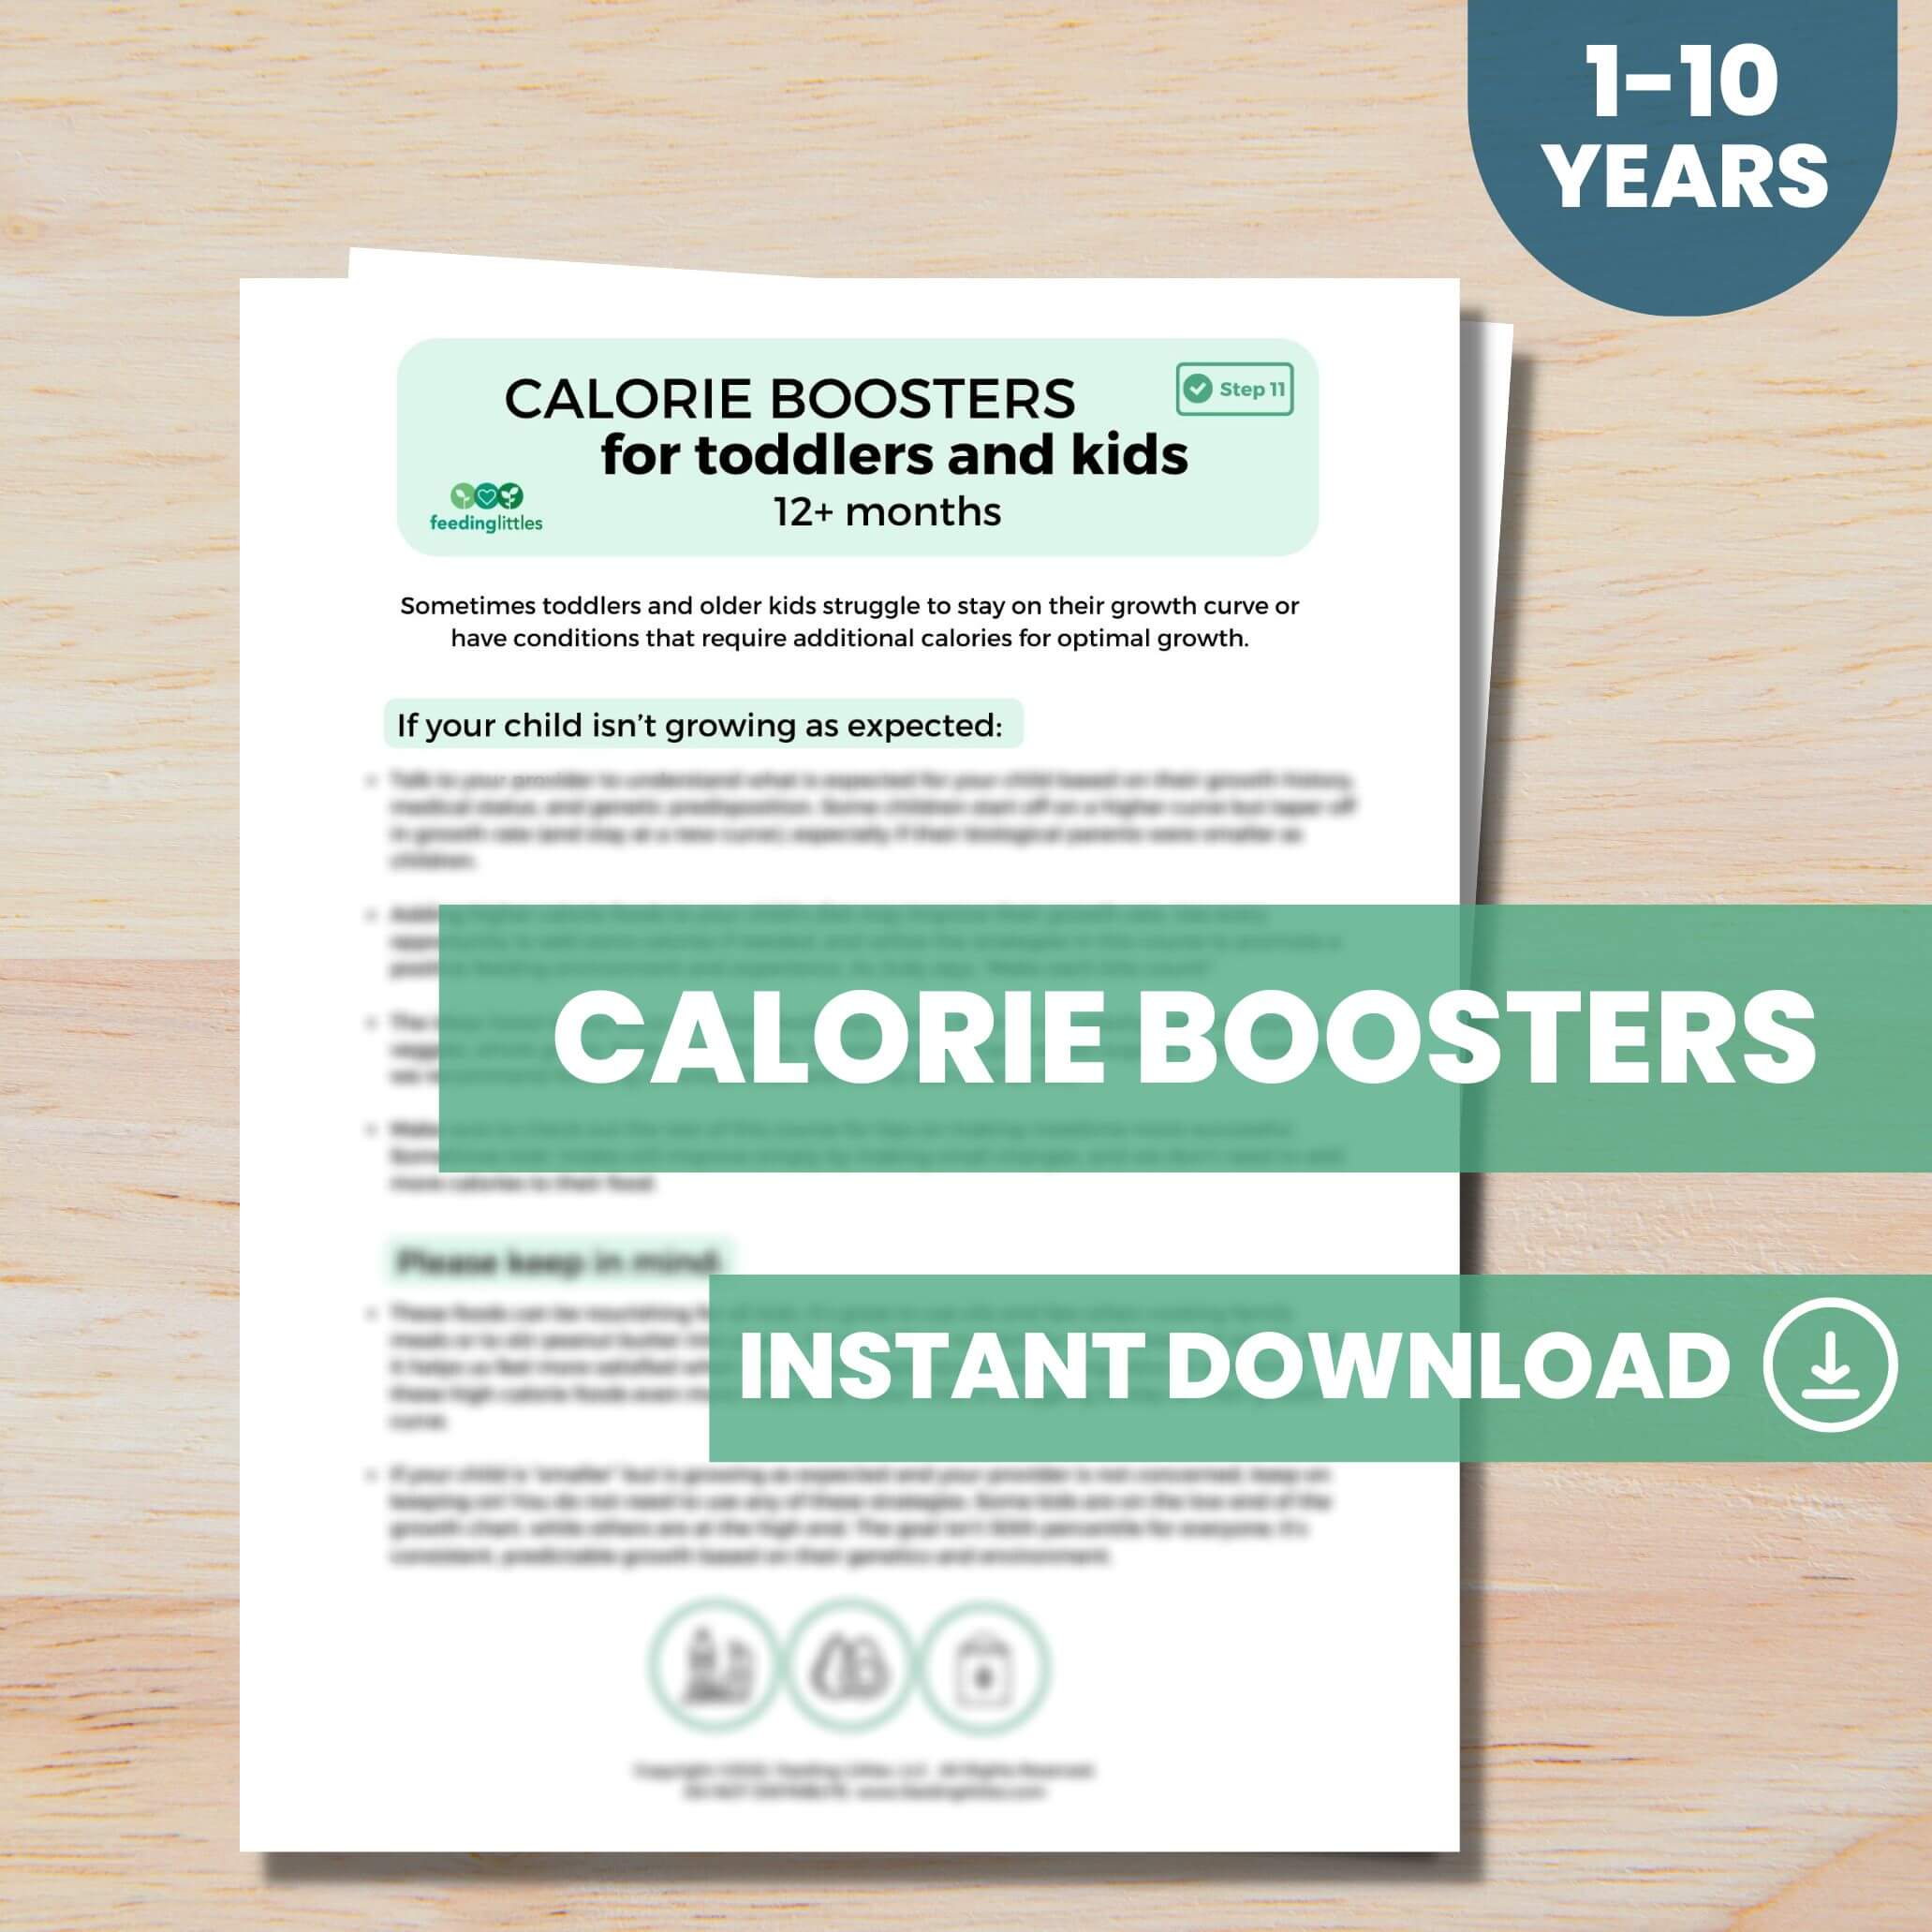 Calorie Boosters for Toddlers and Kids